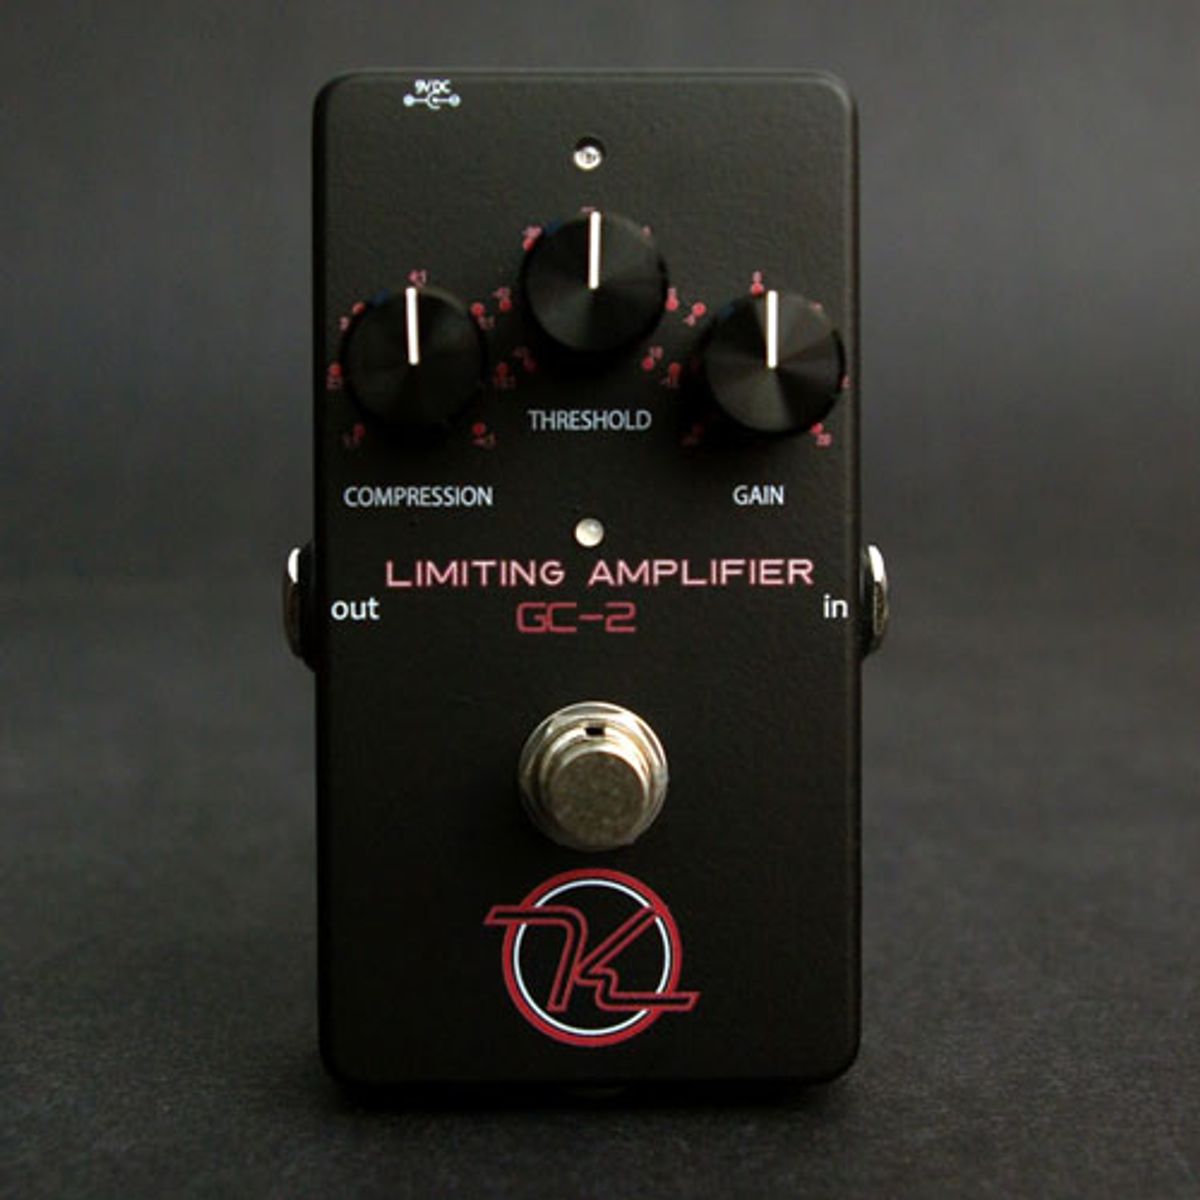 Keeley Introduces the GC-2 Limiting Amplifier